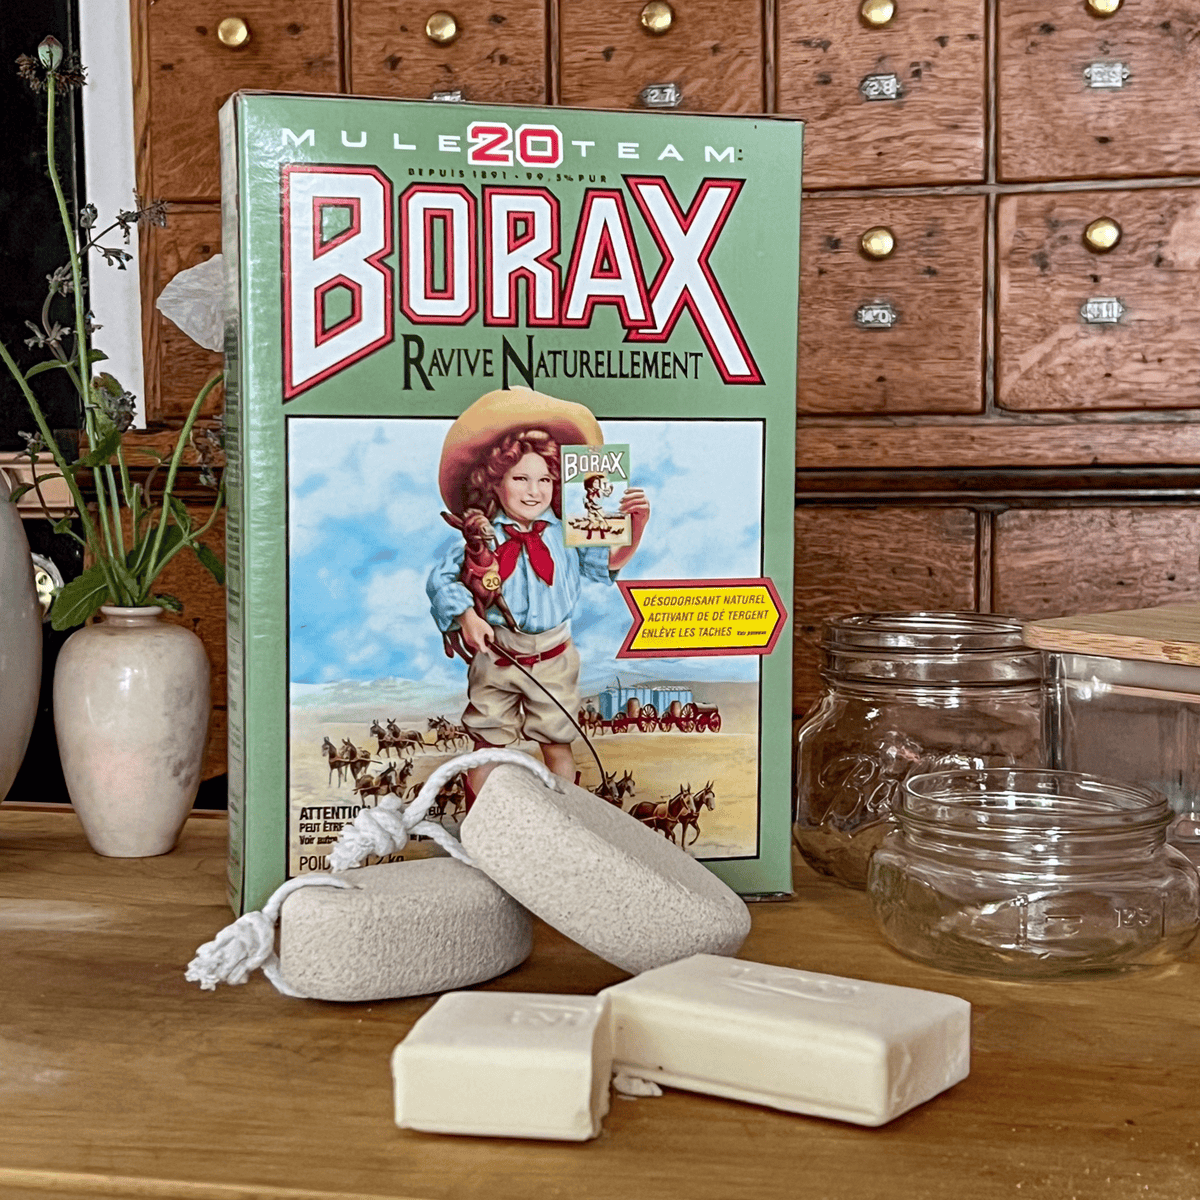 Borax, pumice stones, mason jars and soap laid out on wood cutting board for making hand scrub.